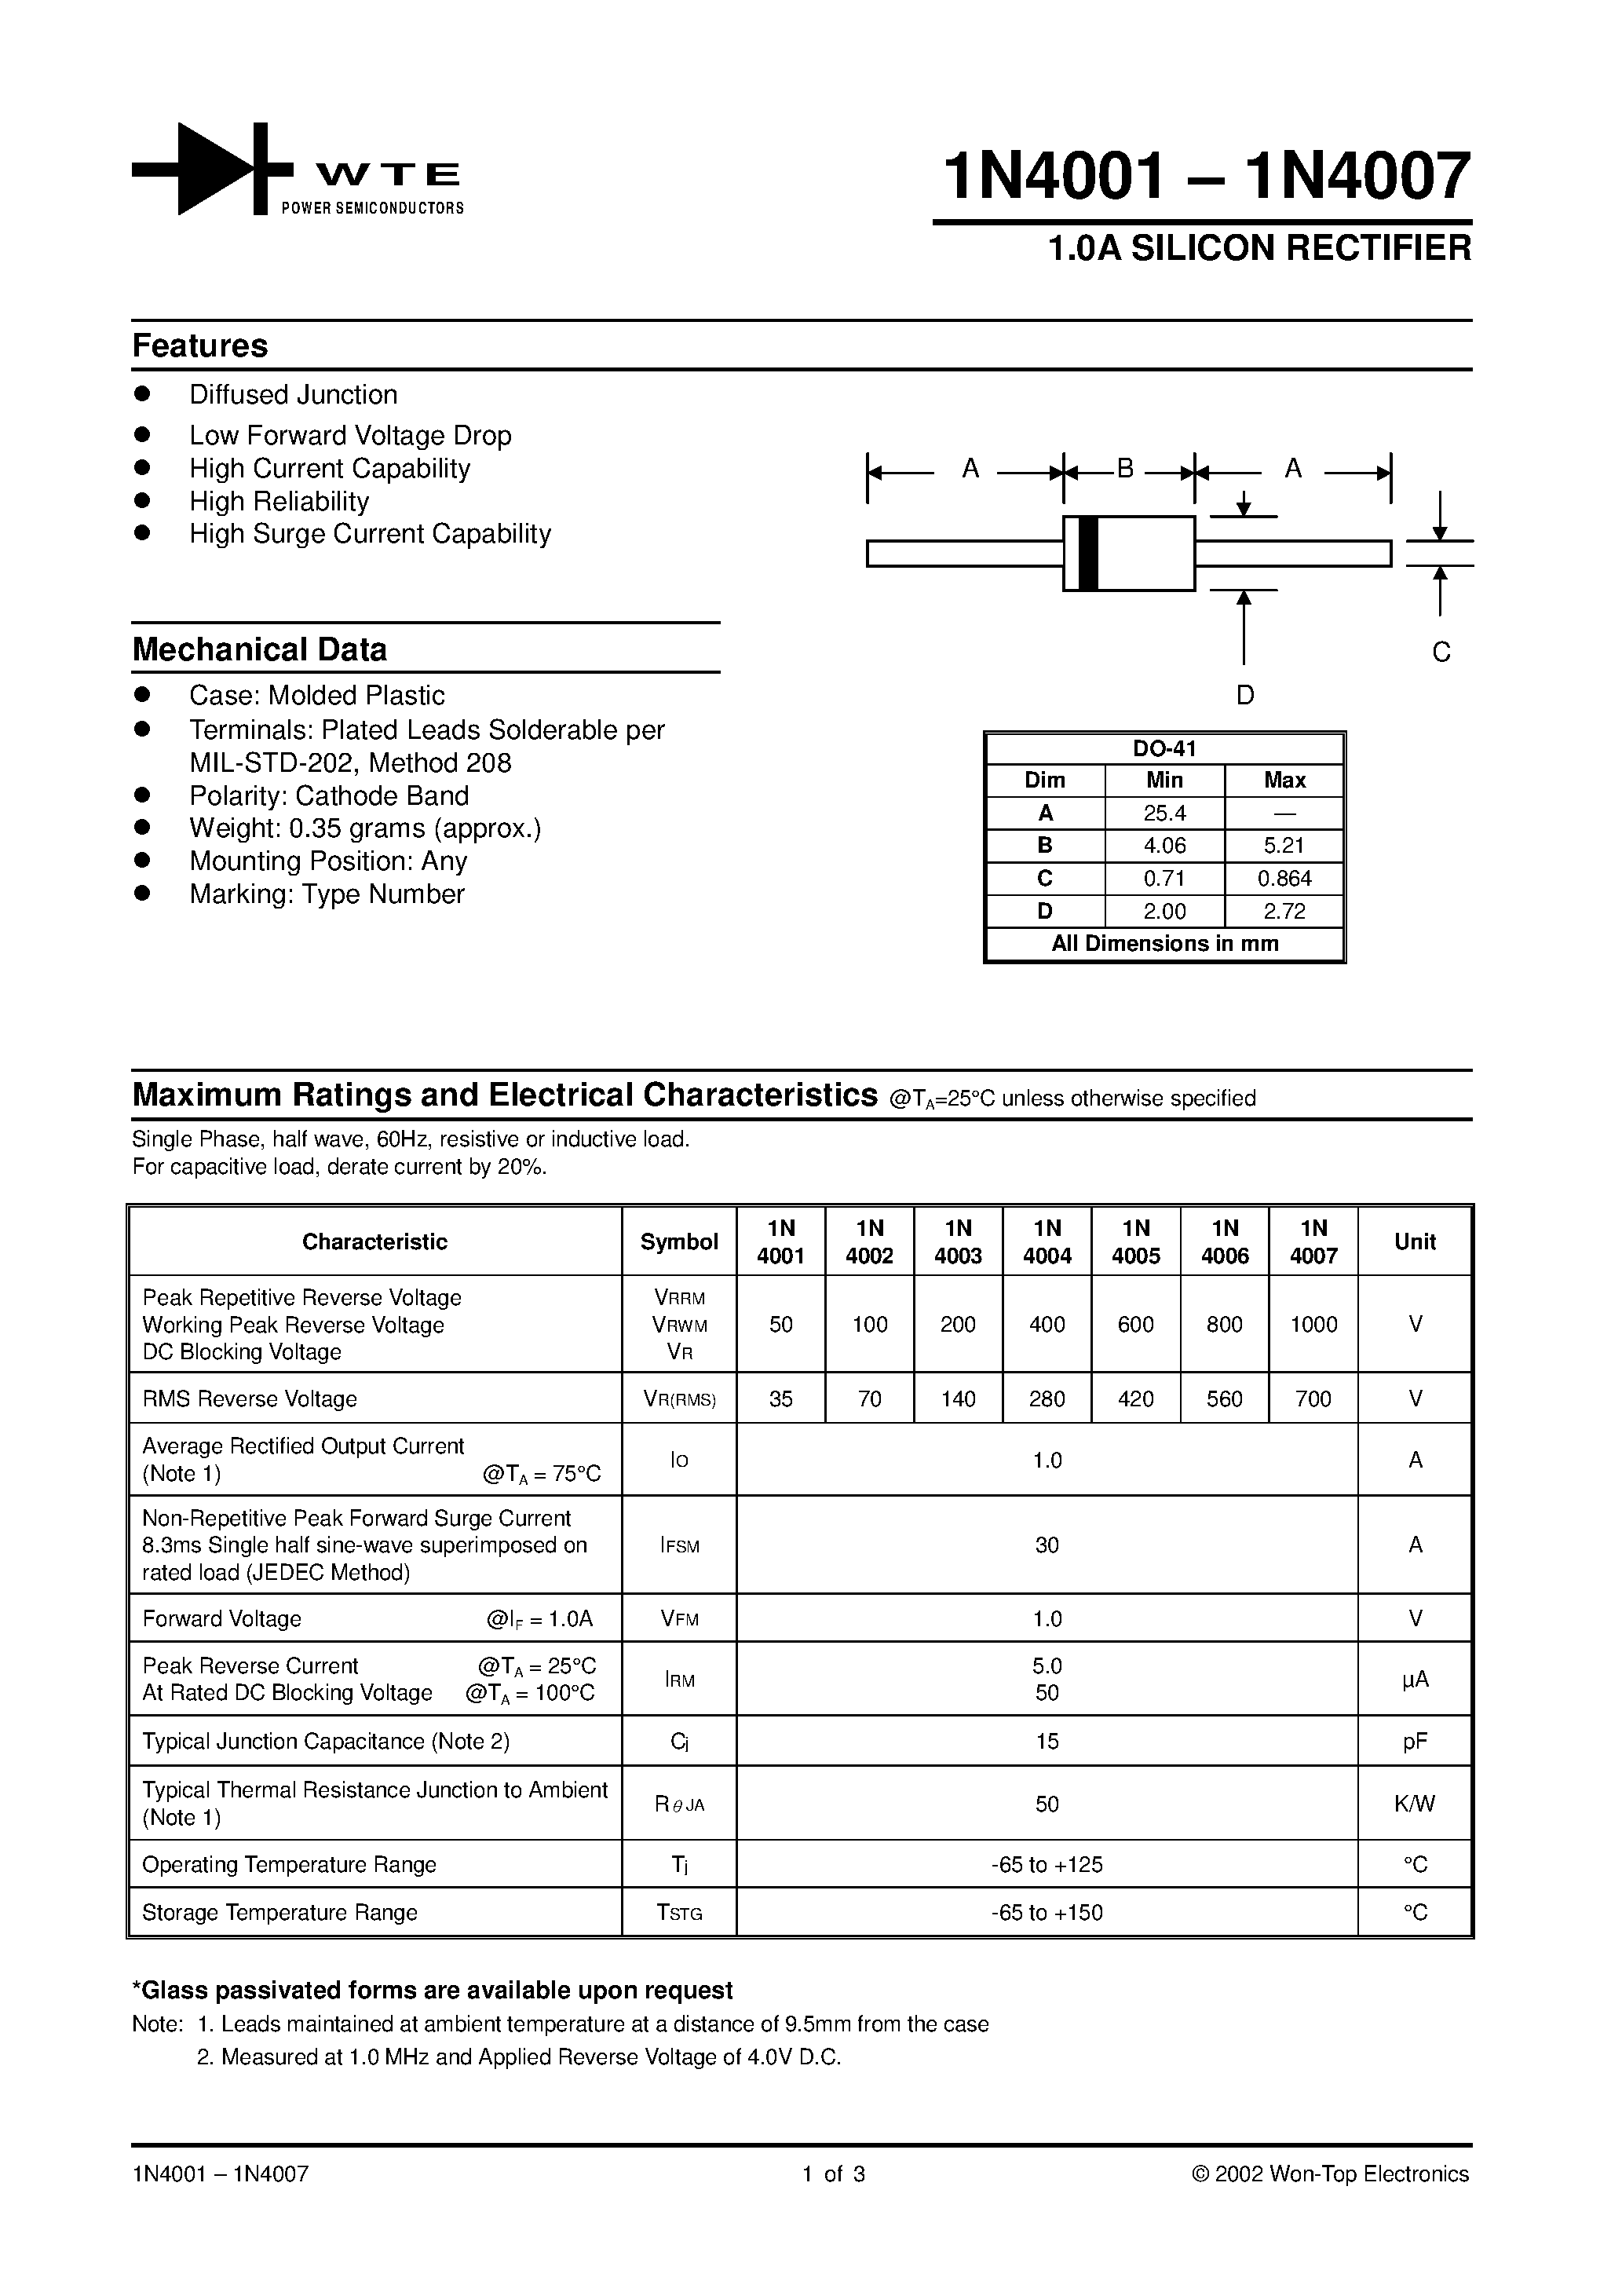 Datasheet 1N4001 - (1N4001 - 1N4007) 1.0A SILICON RECTIFIER page 1